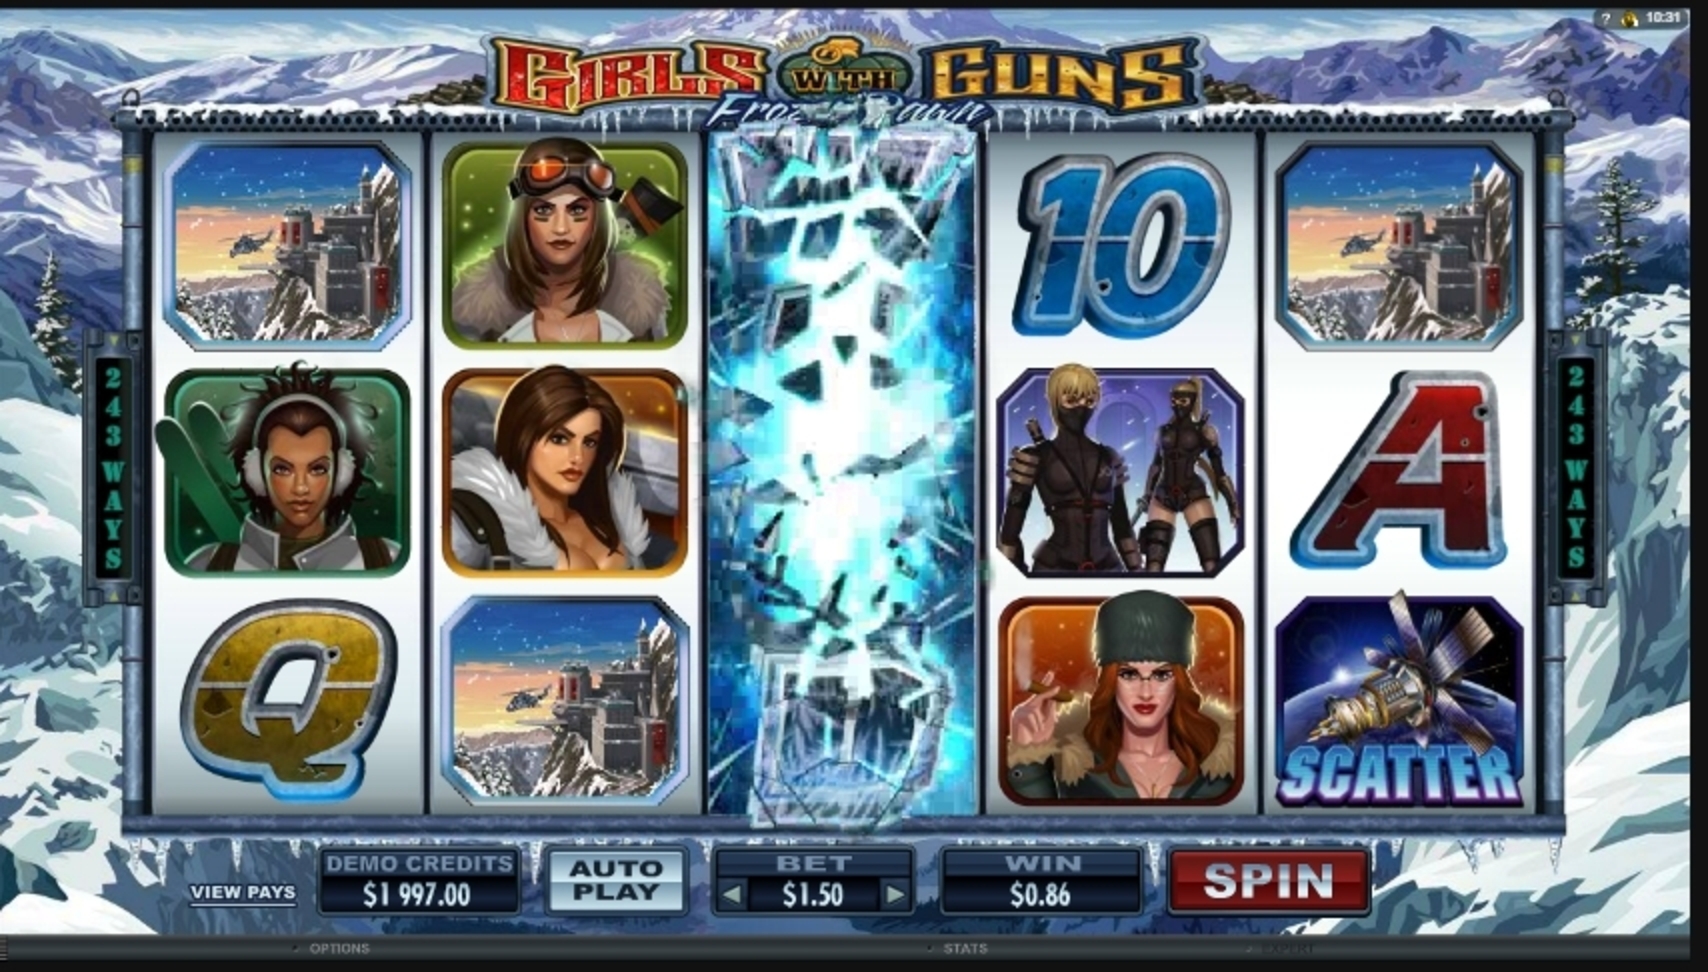 Win Money in Girls With Guns - Frozen Dawn Free Slot Game by Microgaming